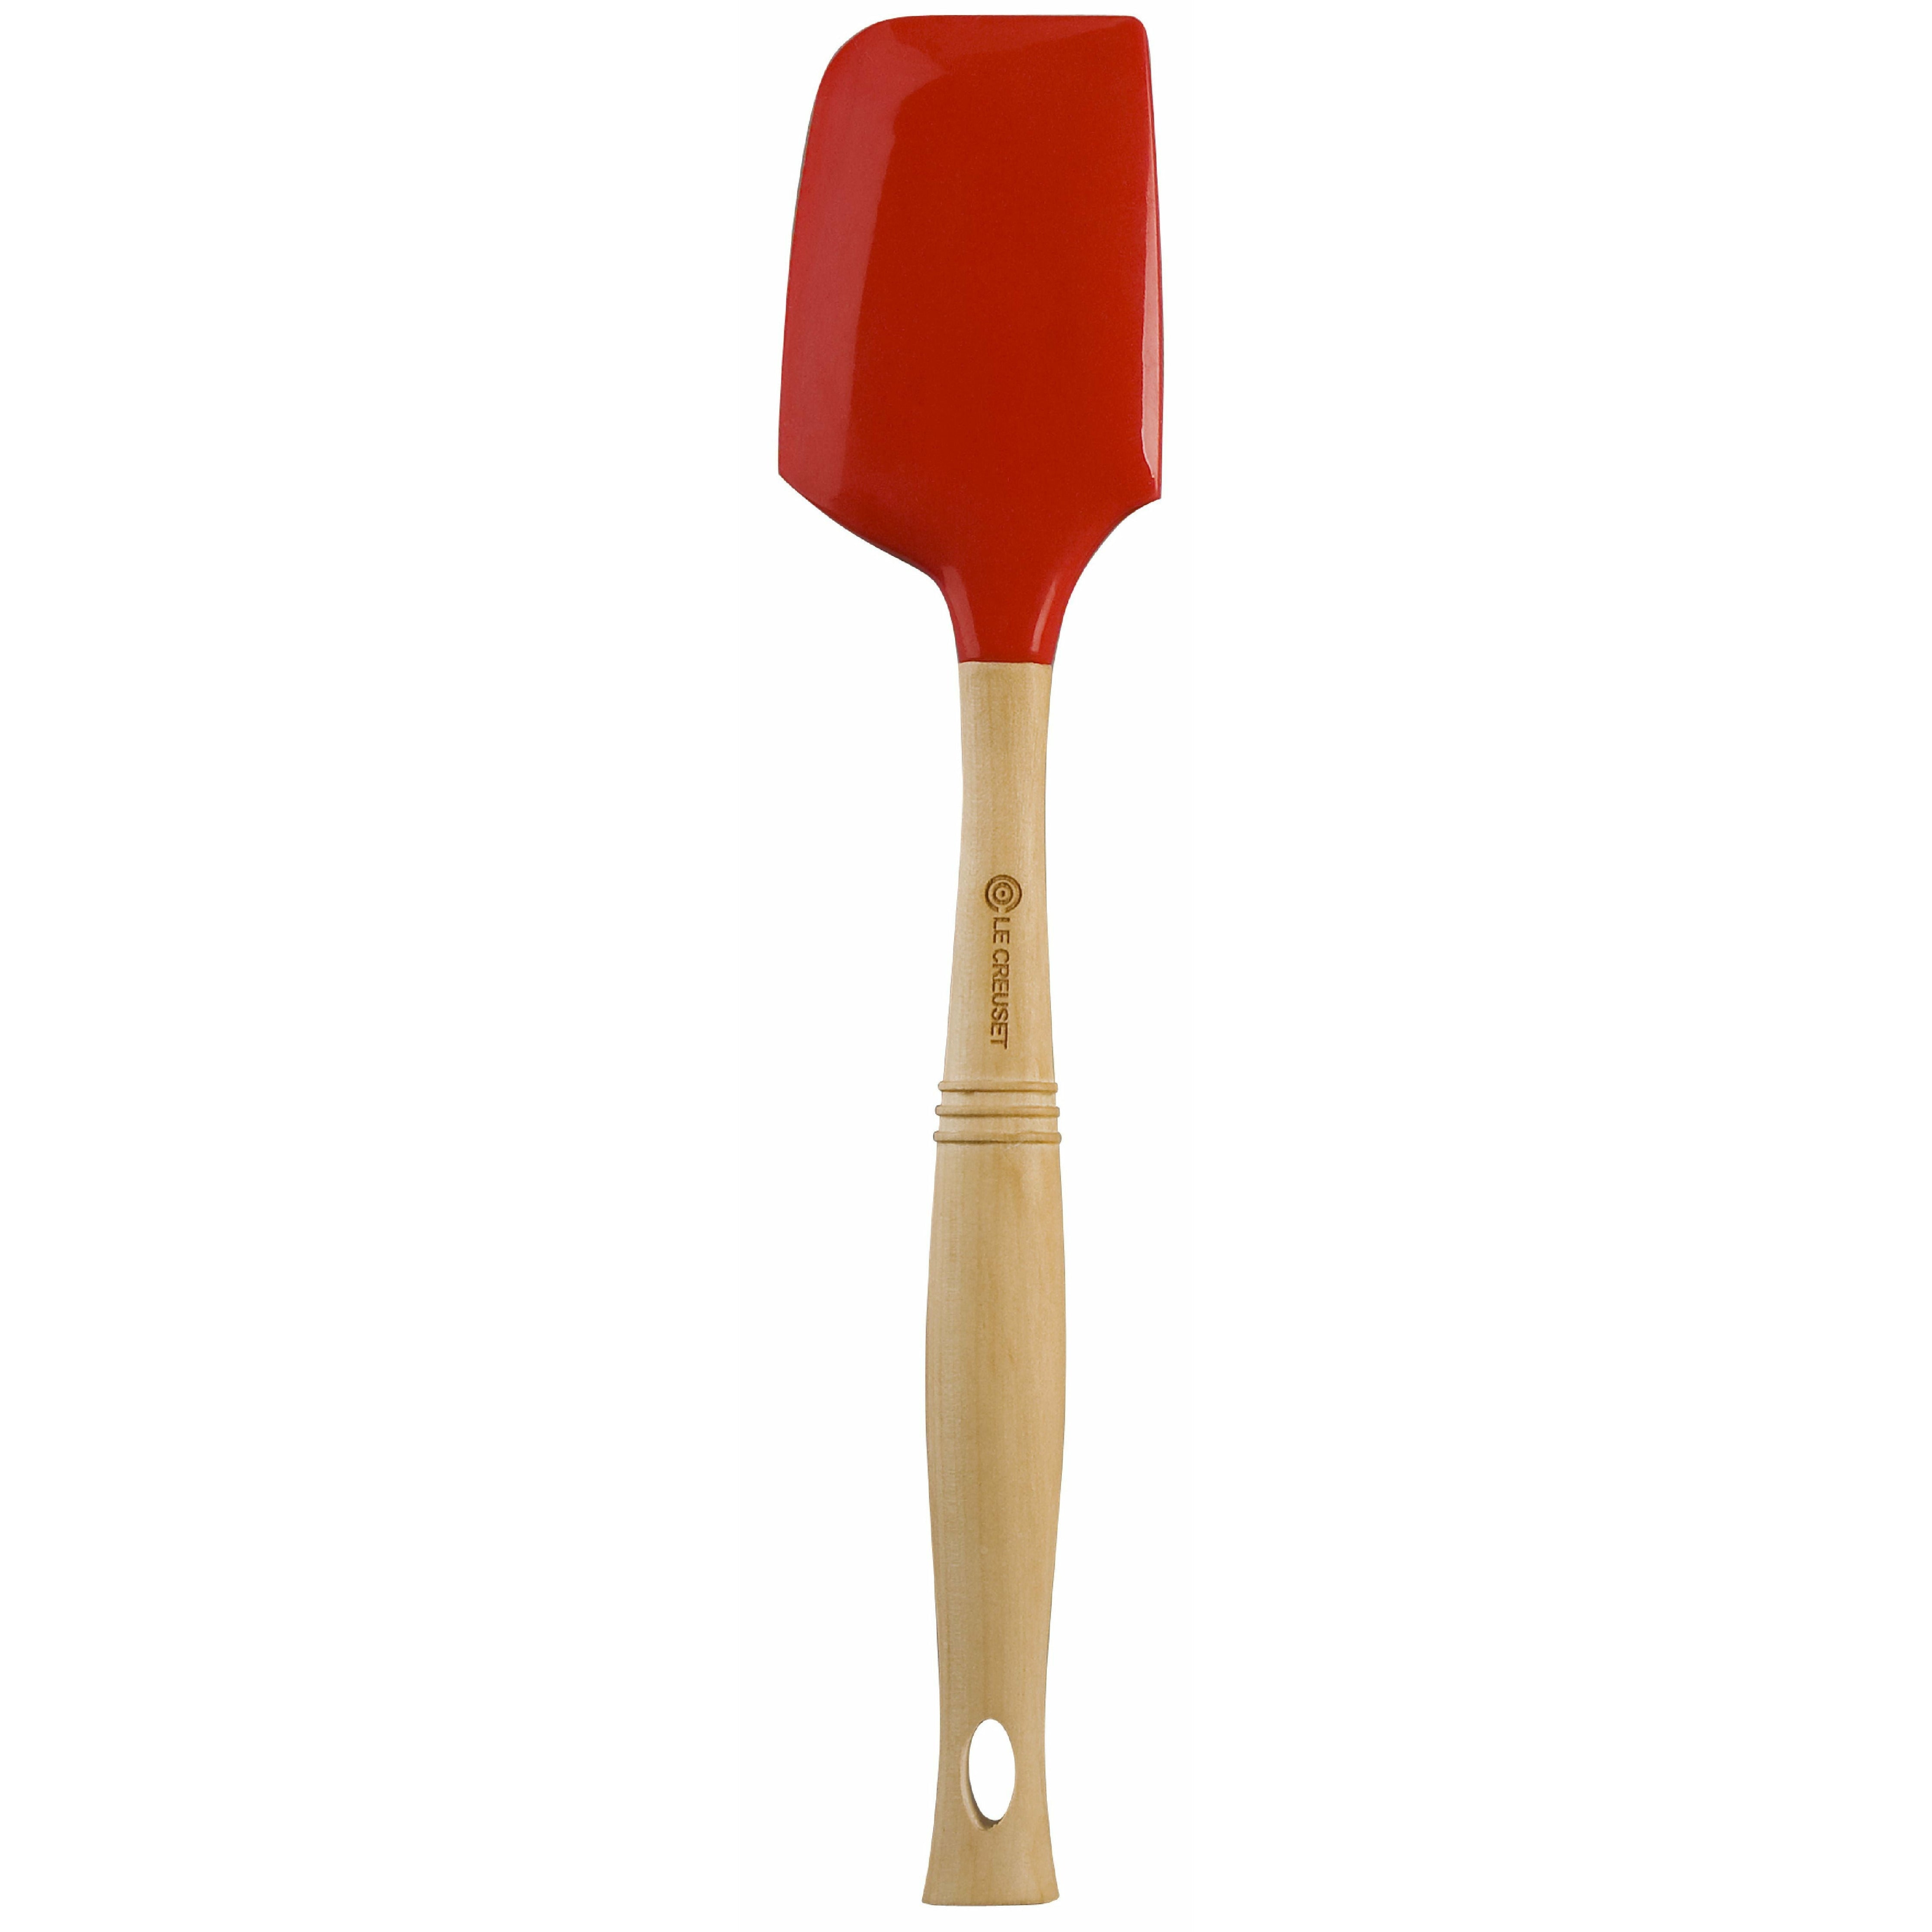 Le Creuset Cooking Trowel Premium Large, Cherry Red